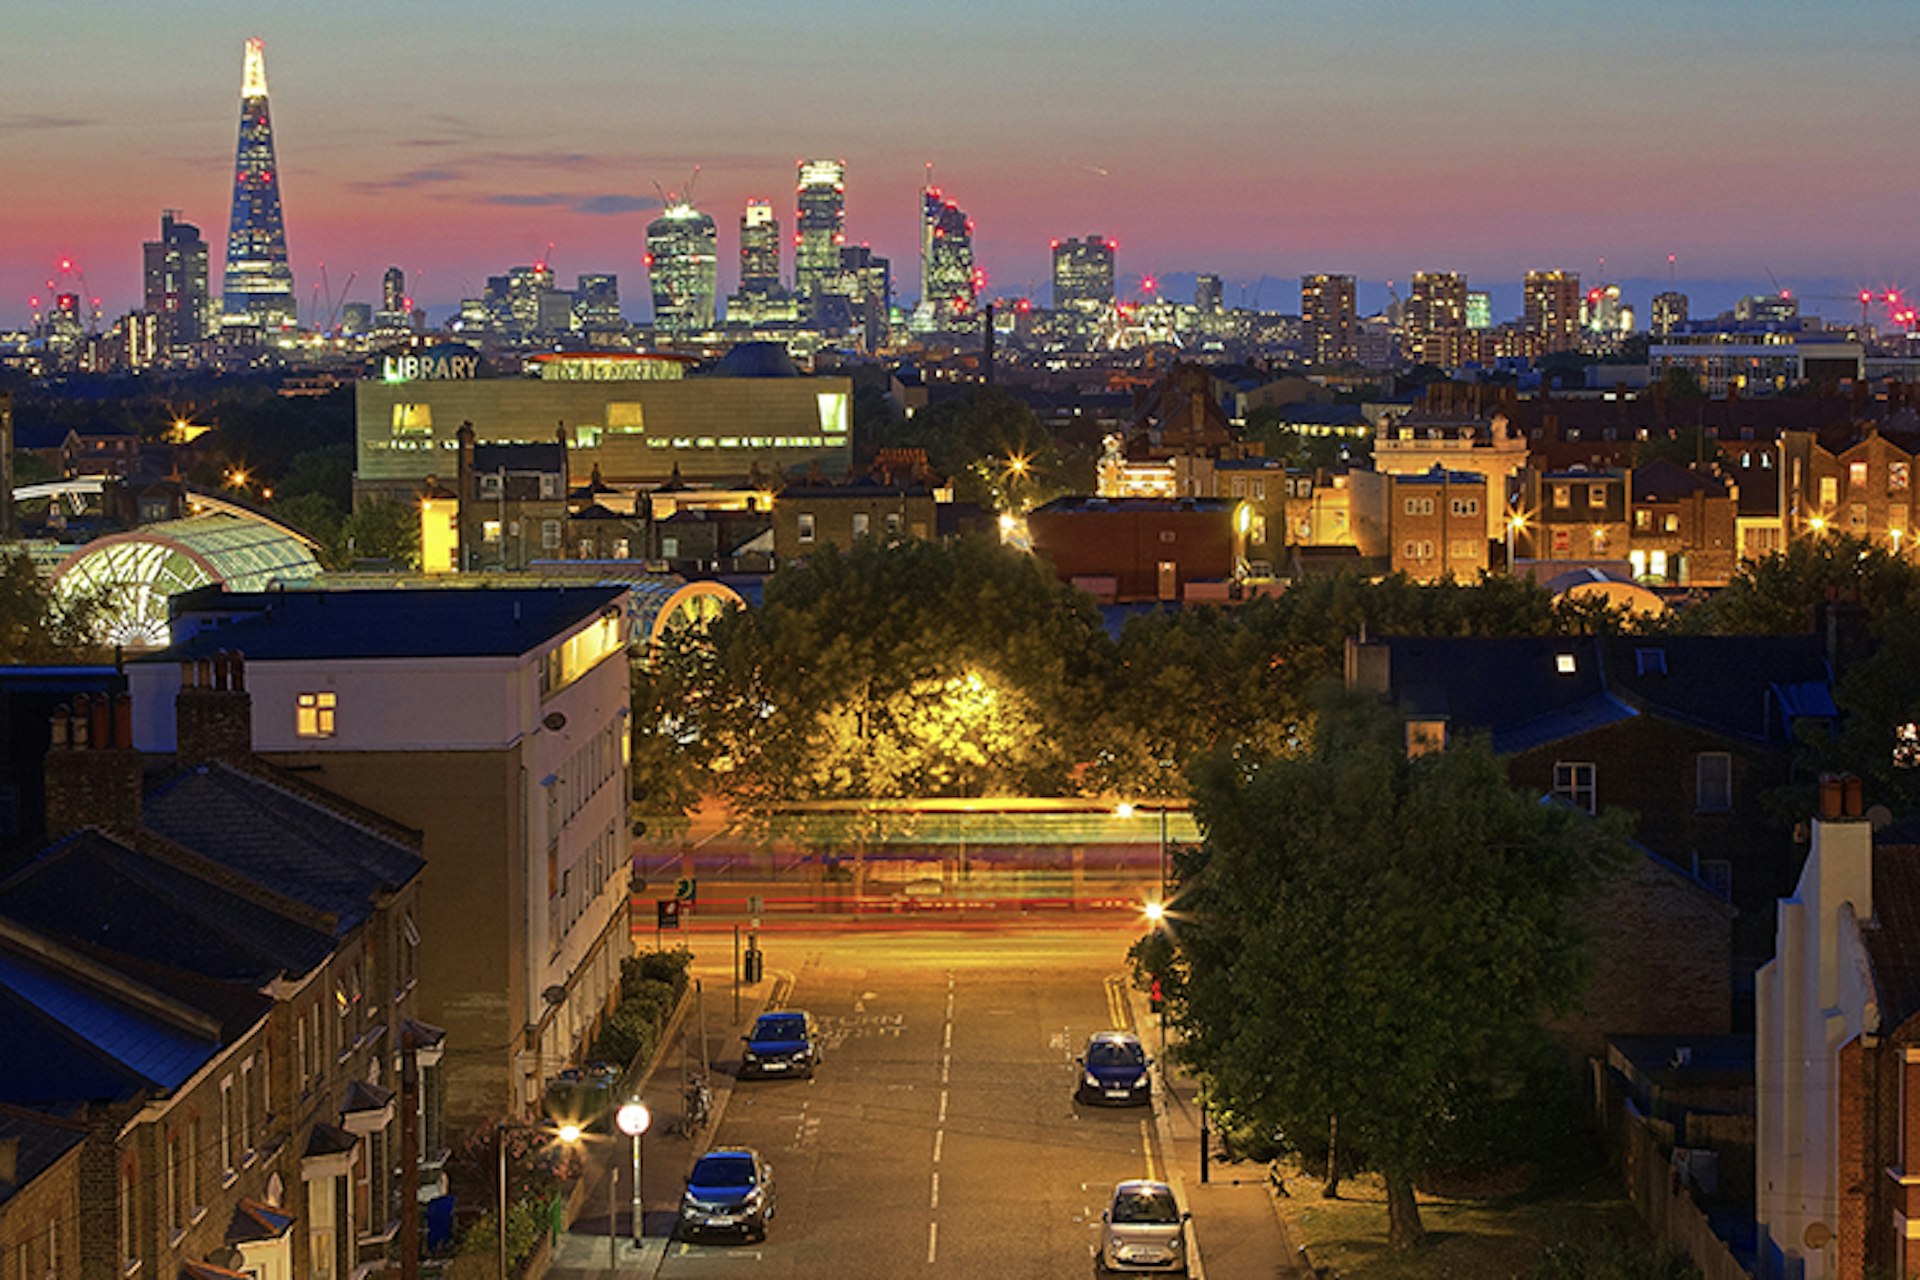 Central London as seen from the rooftops of Peckham.